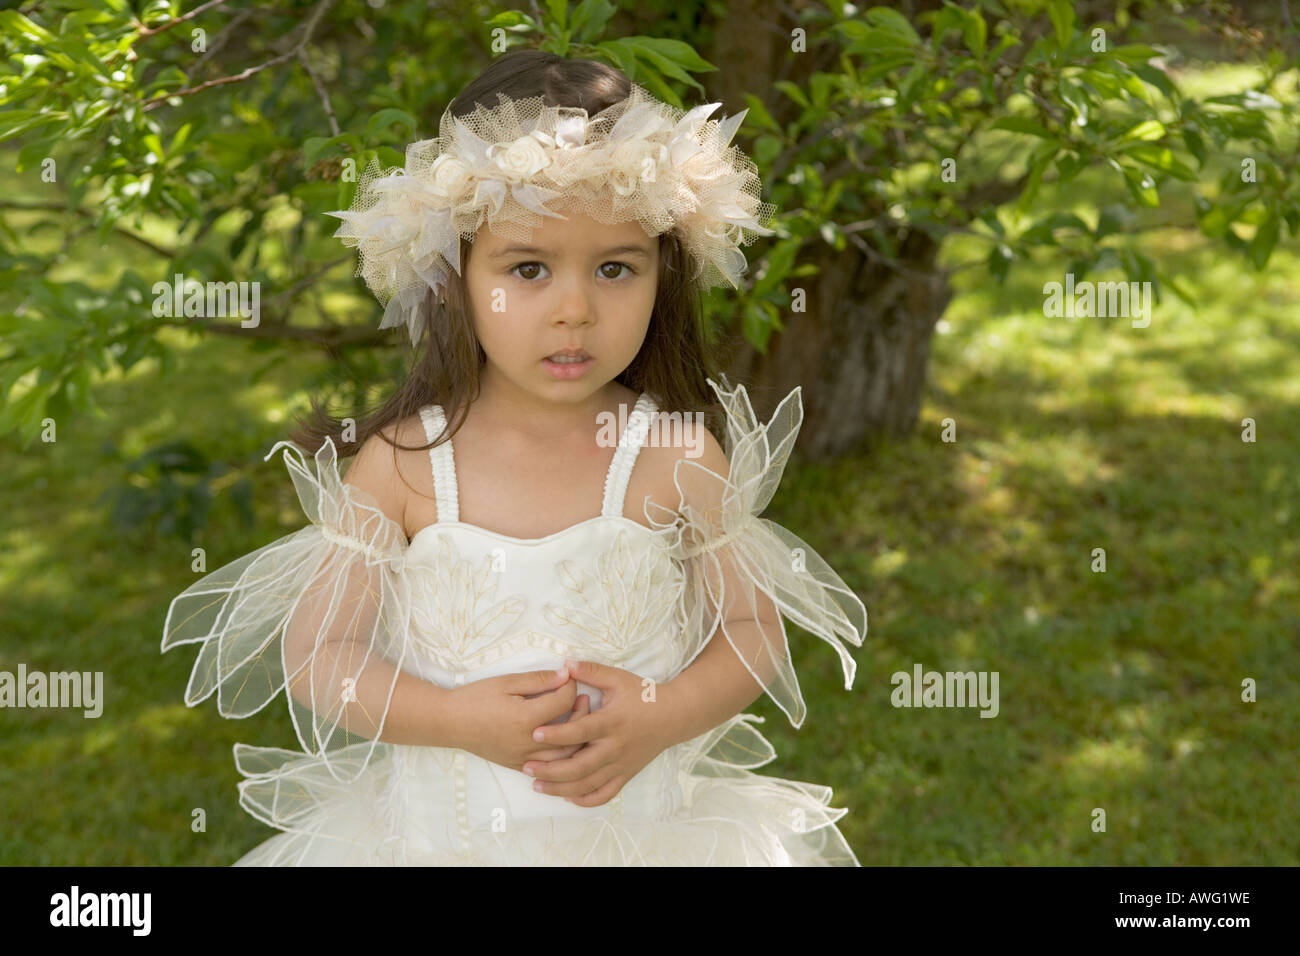 Little girl aged 3 in a bridesmaid dress beneath a tree on a green grass lawn Stock Photo